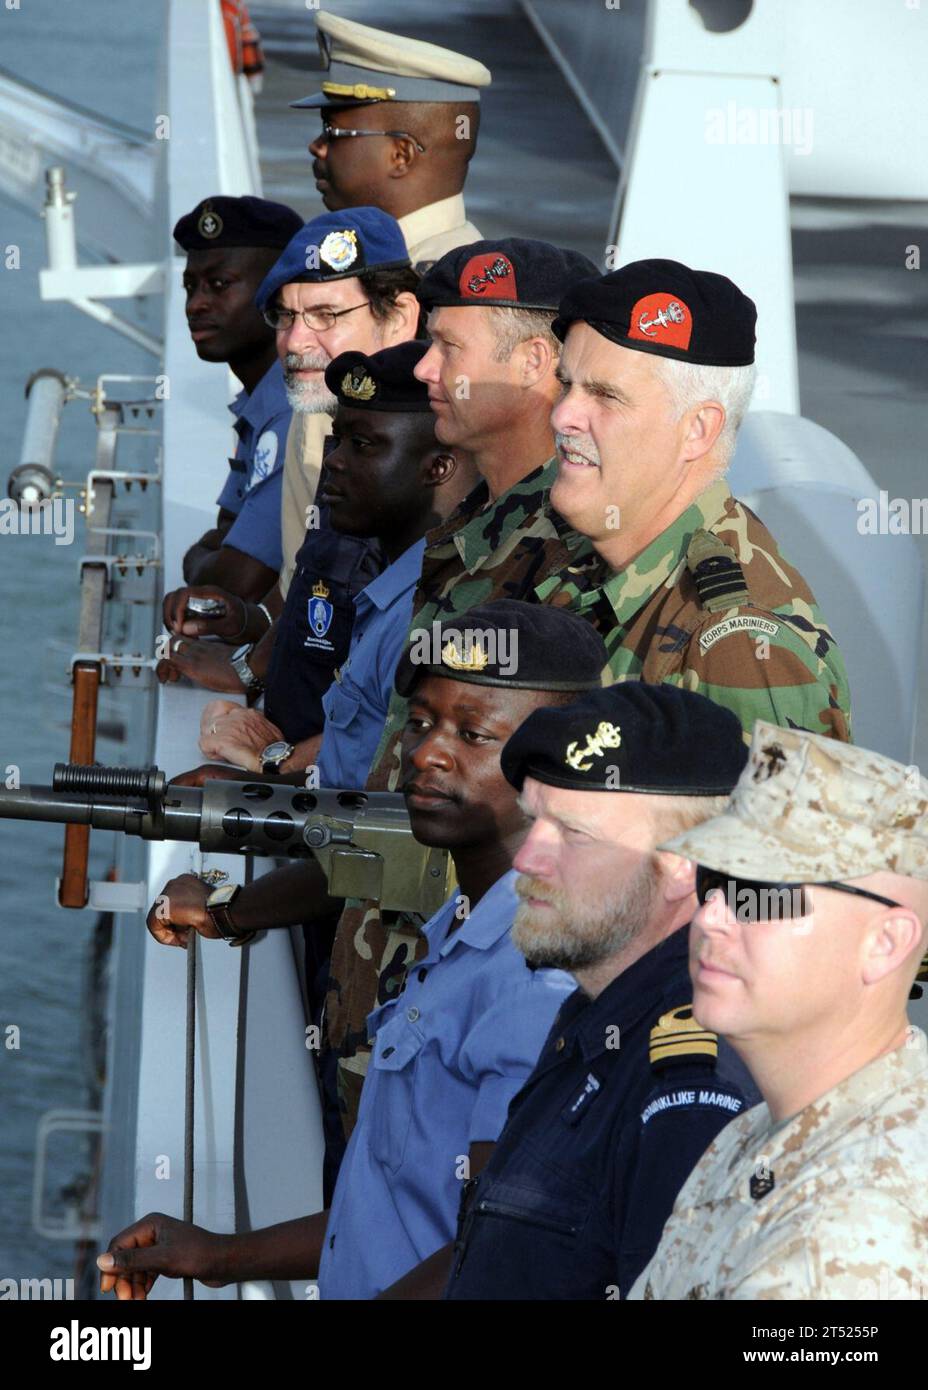 0910141429M-013 FREETOWN, Sierra Leone (Oct. 14, 2009) Sailors and Marines from Ghana, Senegal, the Netherlands and the U.S. man the rails aboard the Royal Dutch navy amphibious ship HNLMS Johan De Witt (L 801) as the ship enters port.  Johan De Witt is in Sierra Leone for a two-day port visit where she will deliver medical and relief supplies supporting Africa Partnership Station.  Johan De Witt is the first European-led Africa Partnership Station platform and is augmented by personnel from Belgium, Portugal and the United States.  Africa Partnership Station was originally a U.S. Navy initiat Stock Photo